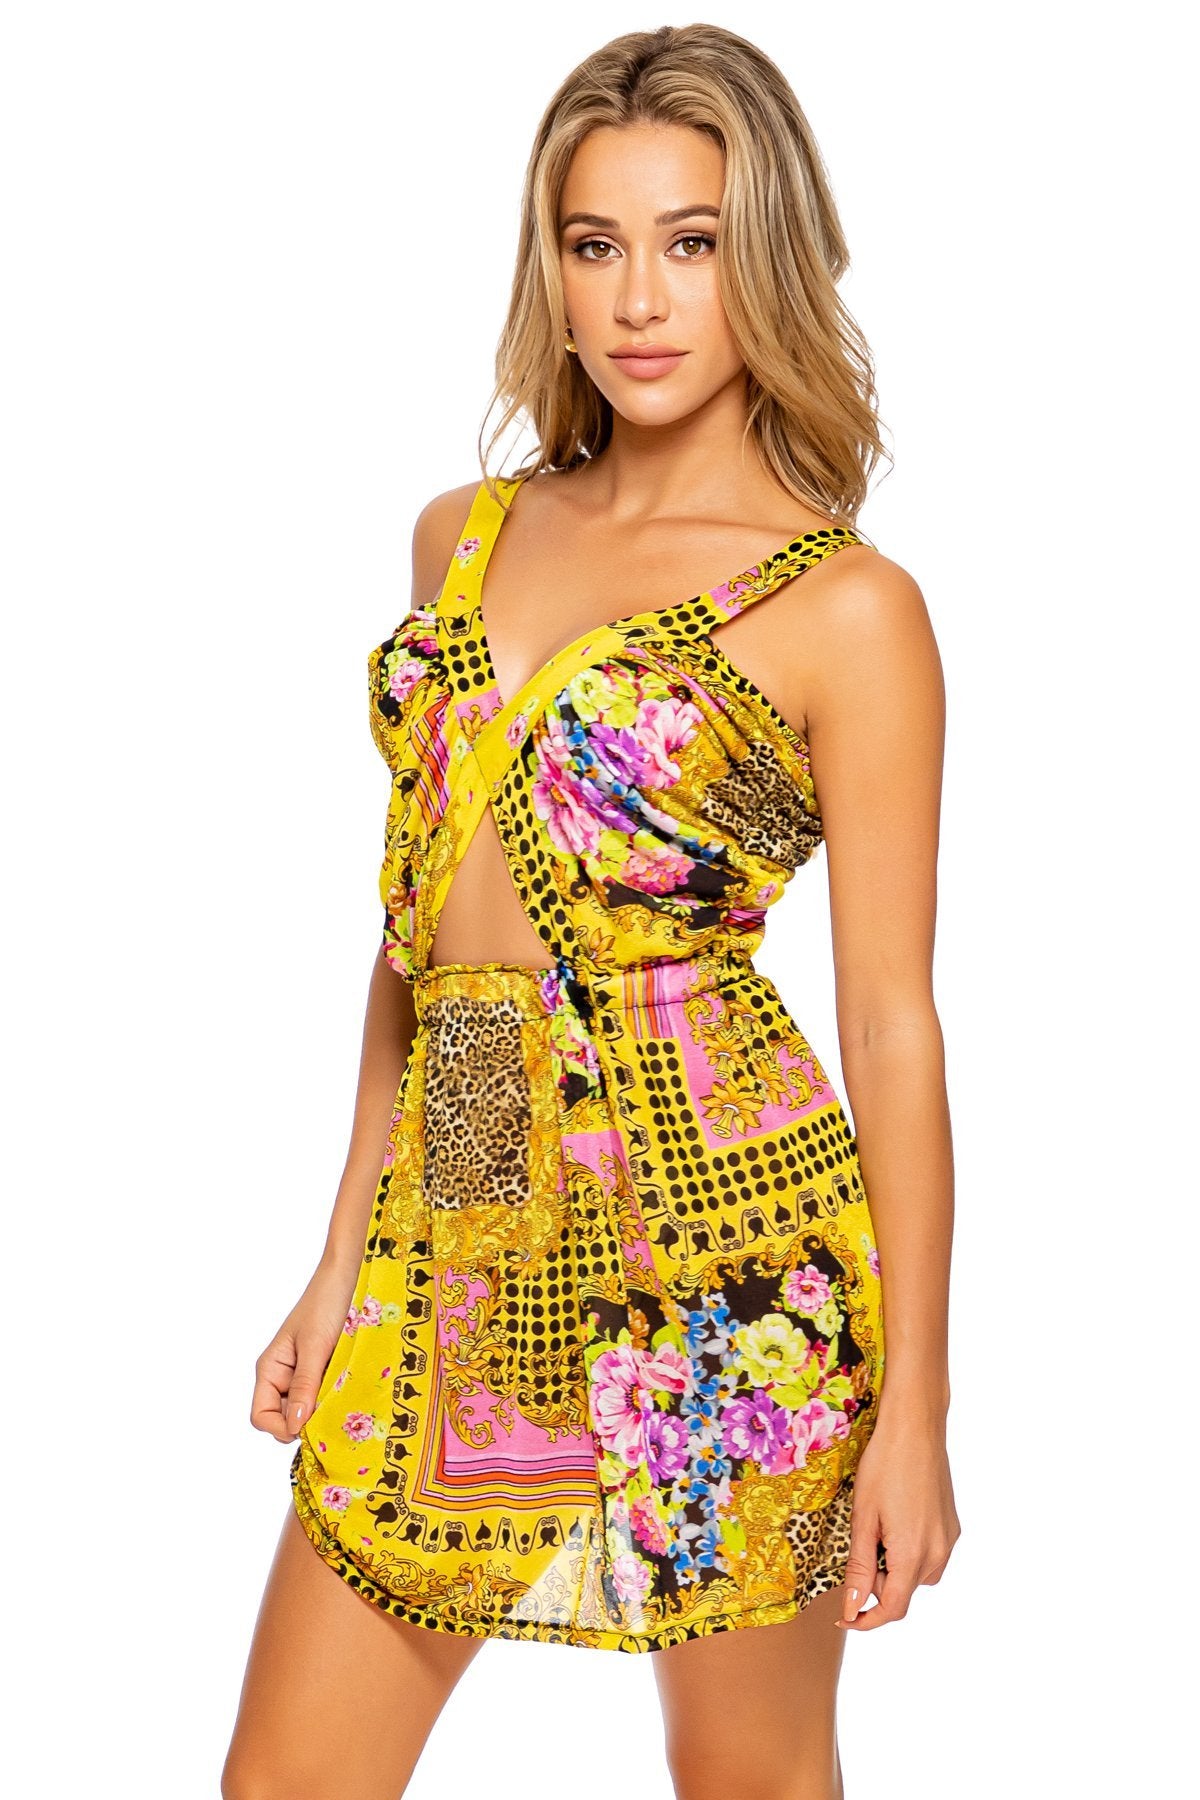 BACK  IN TIME - Timeless Cut Out Short Dress • Multicolor